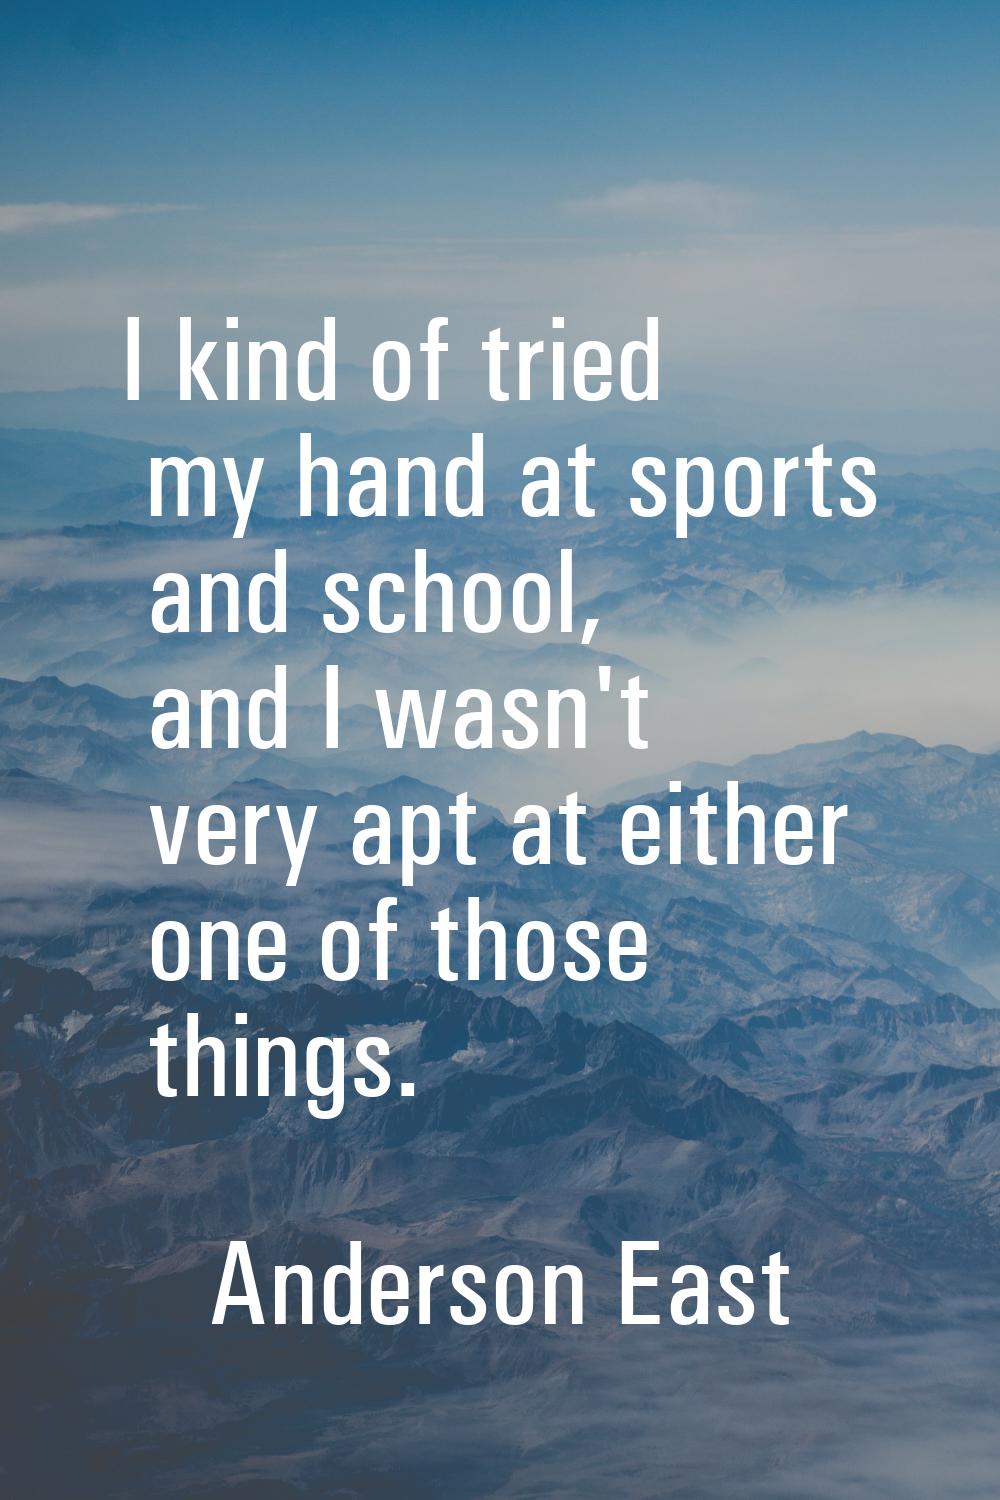 I kind of tried my hand at sports and school, and I wasn't very apt at either one of those things.